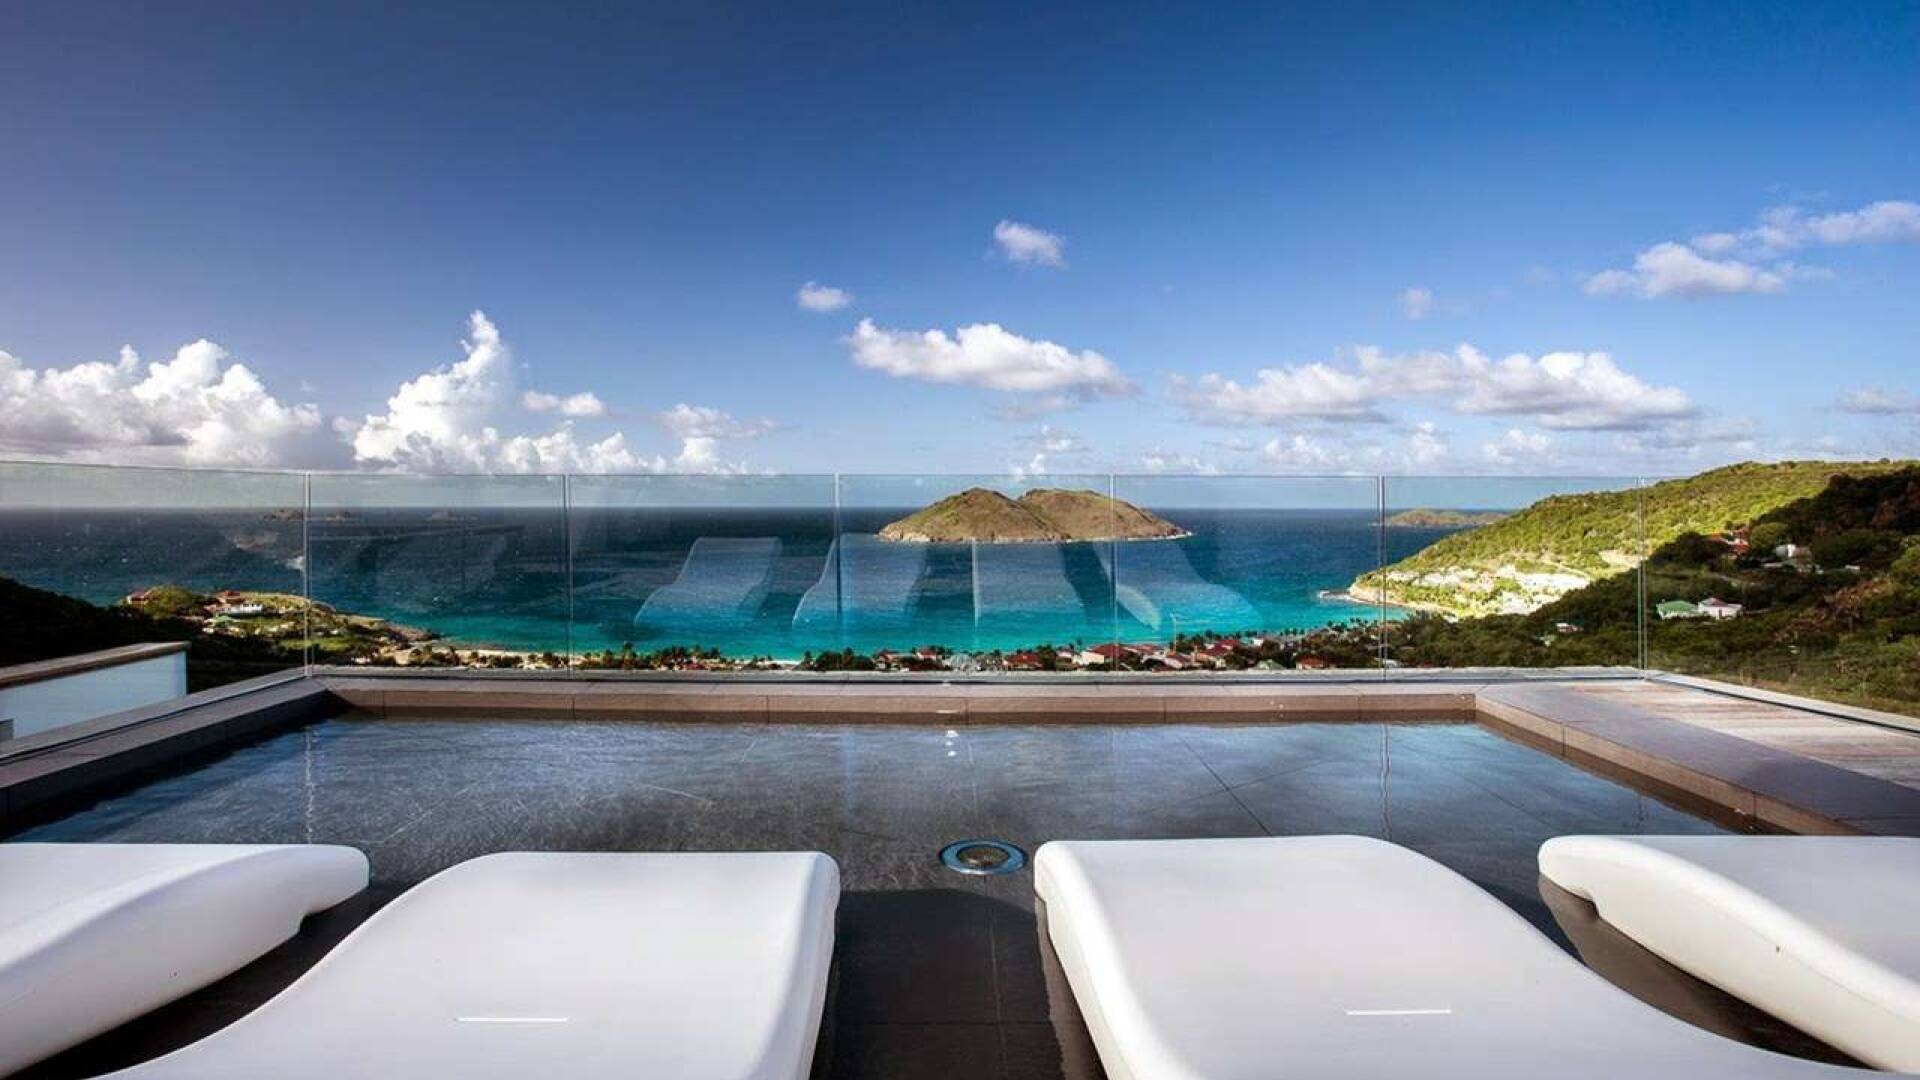 view from WV WAY, Colombier, St. Barthelemy